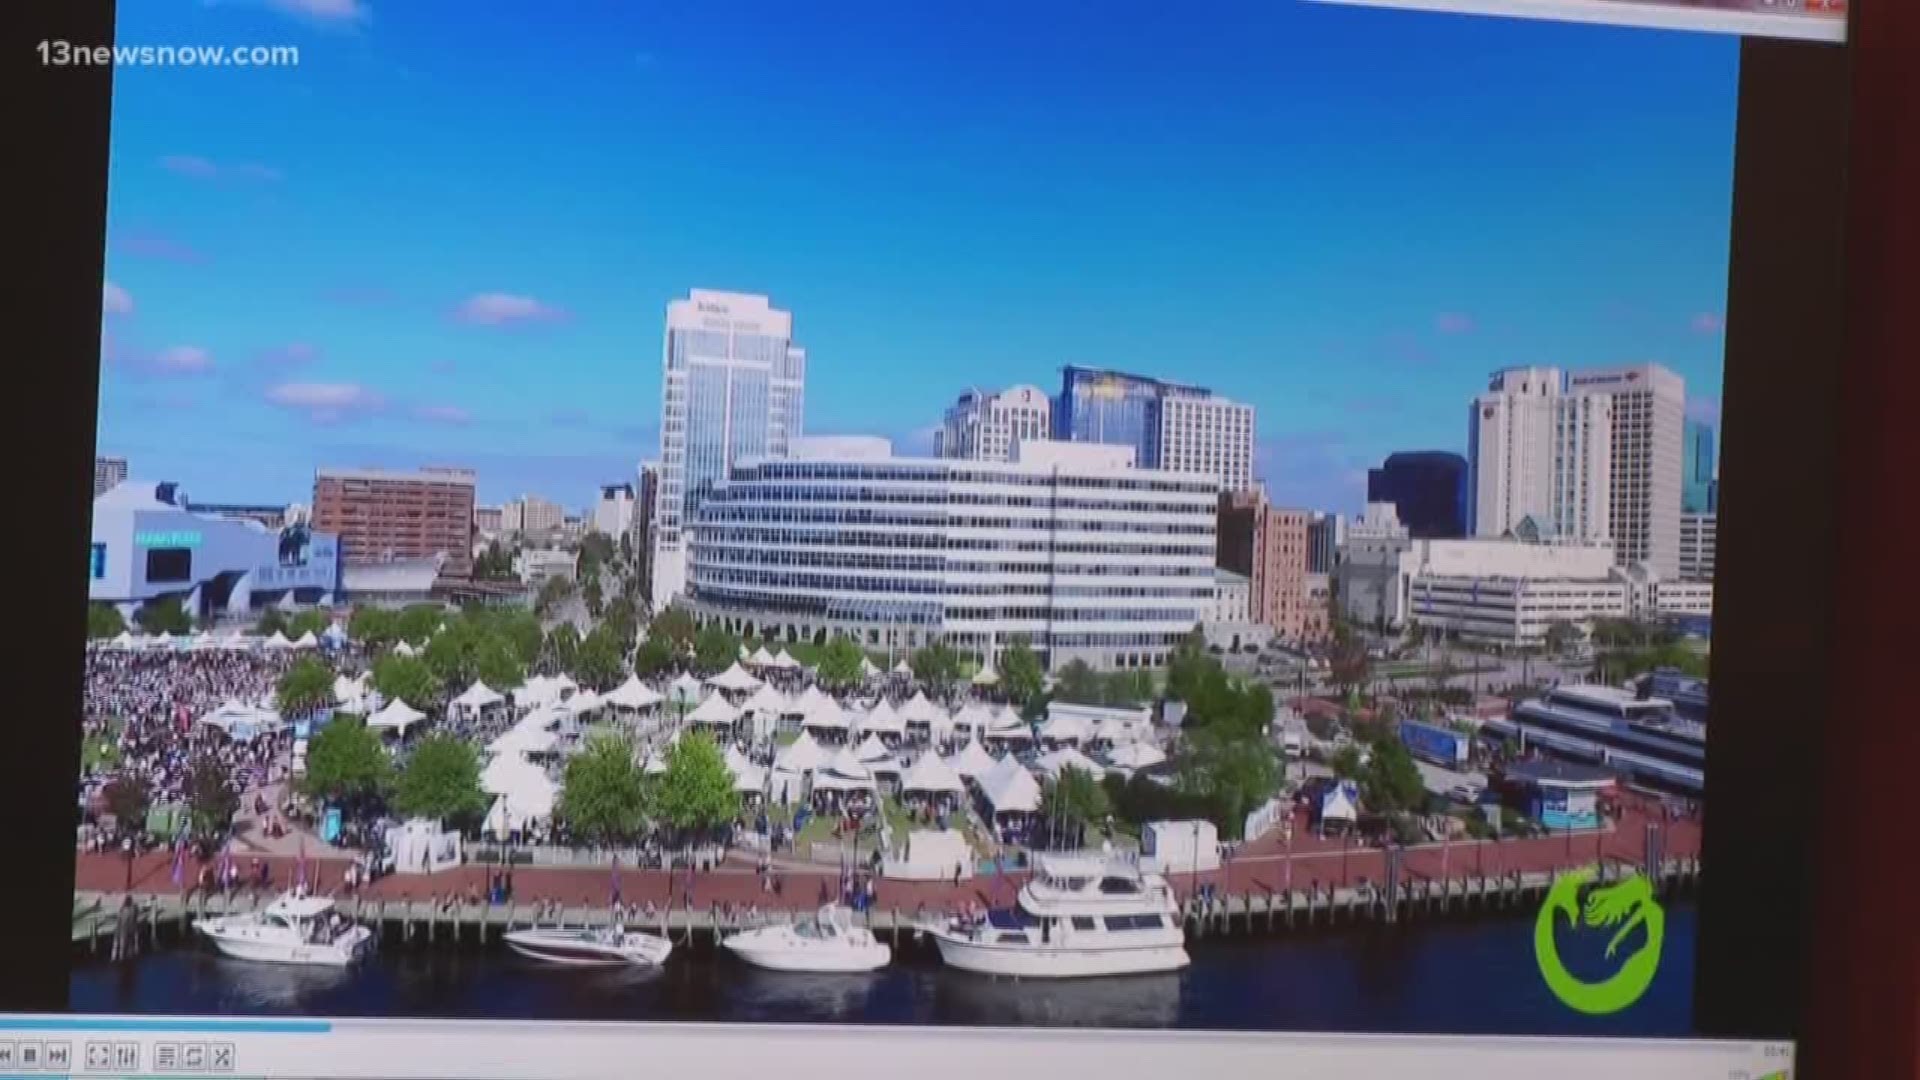 In the meeting, officials said the $700 million Pamunkey Tribe casino will have between 3,500 to 4,500 slots, between 100 to 200 table games, as well as 500 hotel rooms, parking, and between three to five restaurants. The Tribe's Chief, Robert Gray, said in a video he's excited to partner with the city to make this happen.